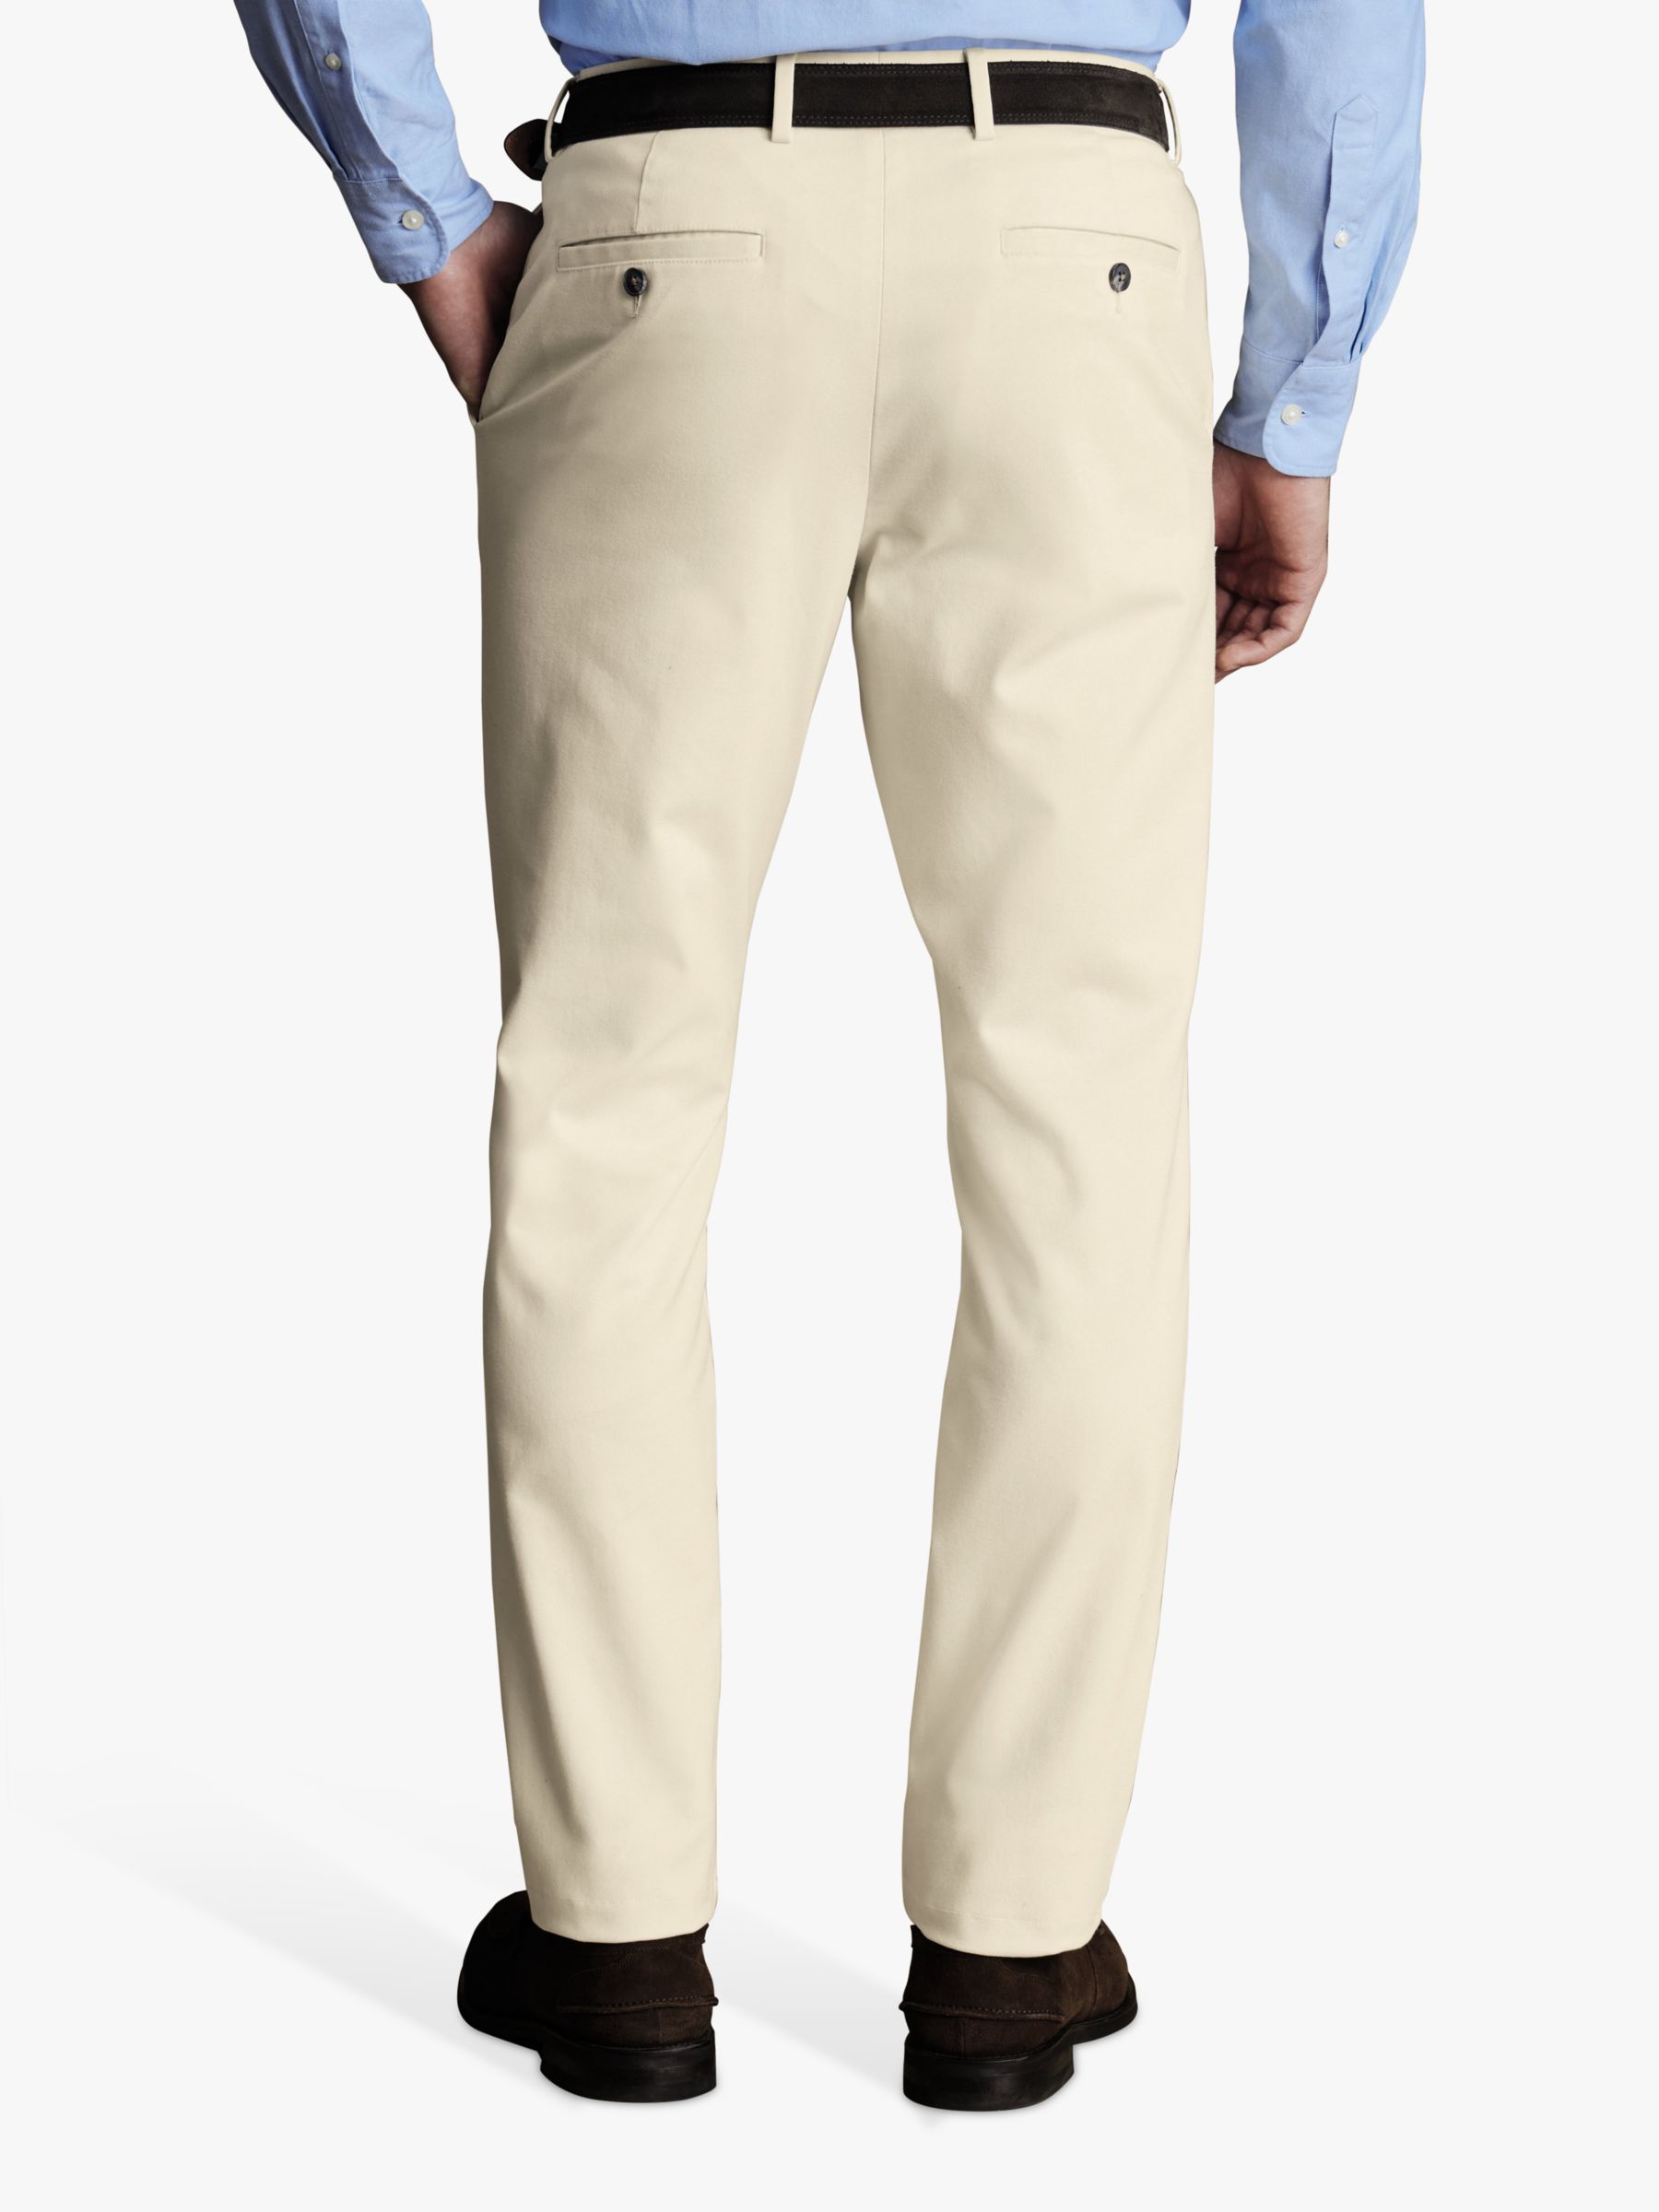 Charles Tyrwhitt Classic Fit Ultimate Non-Iron Chinos, Ivory, W32/L30